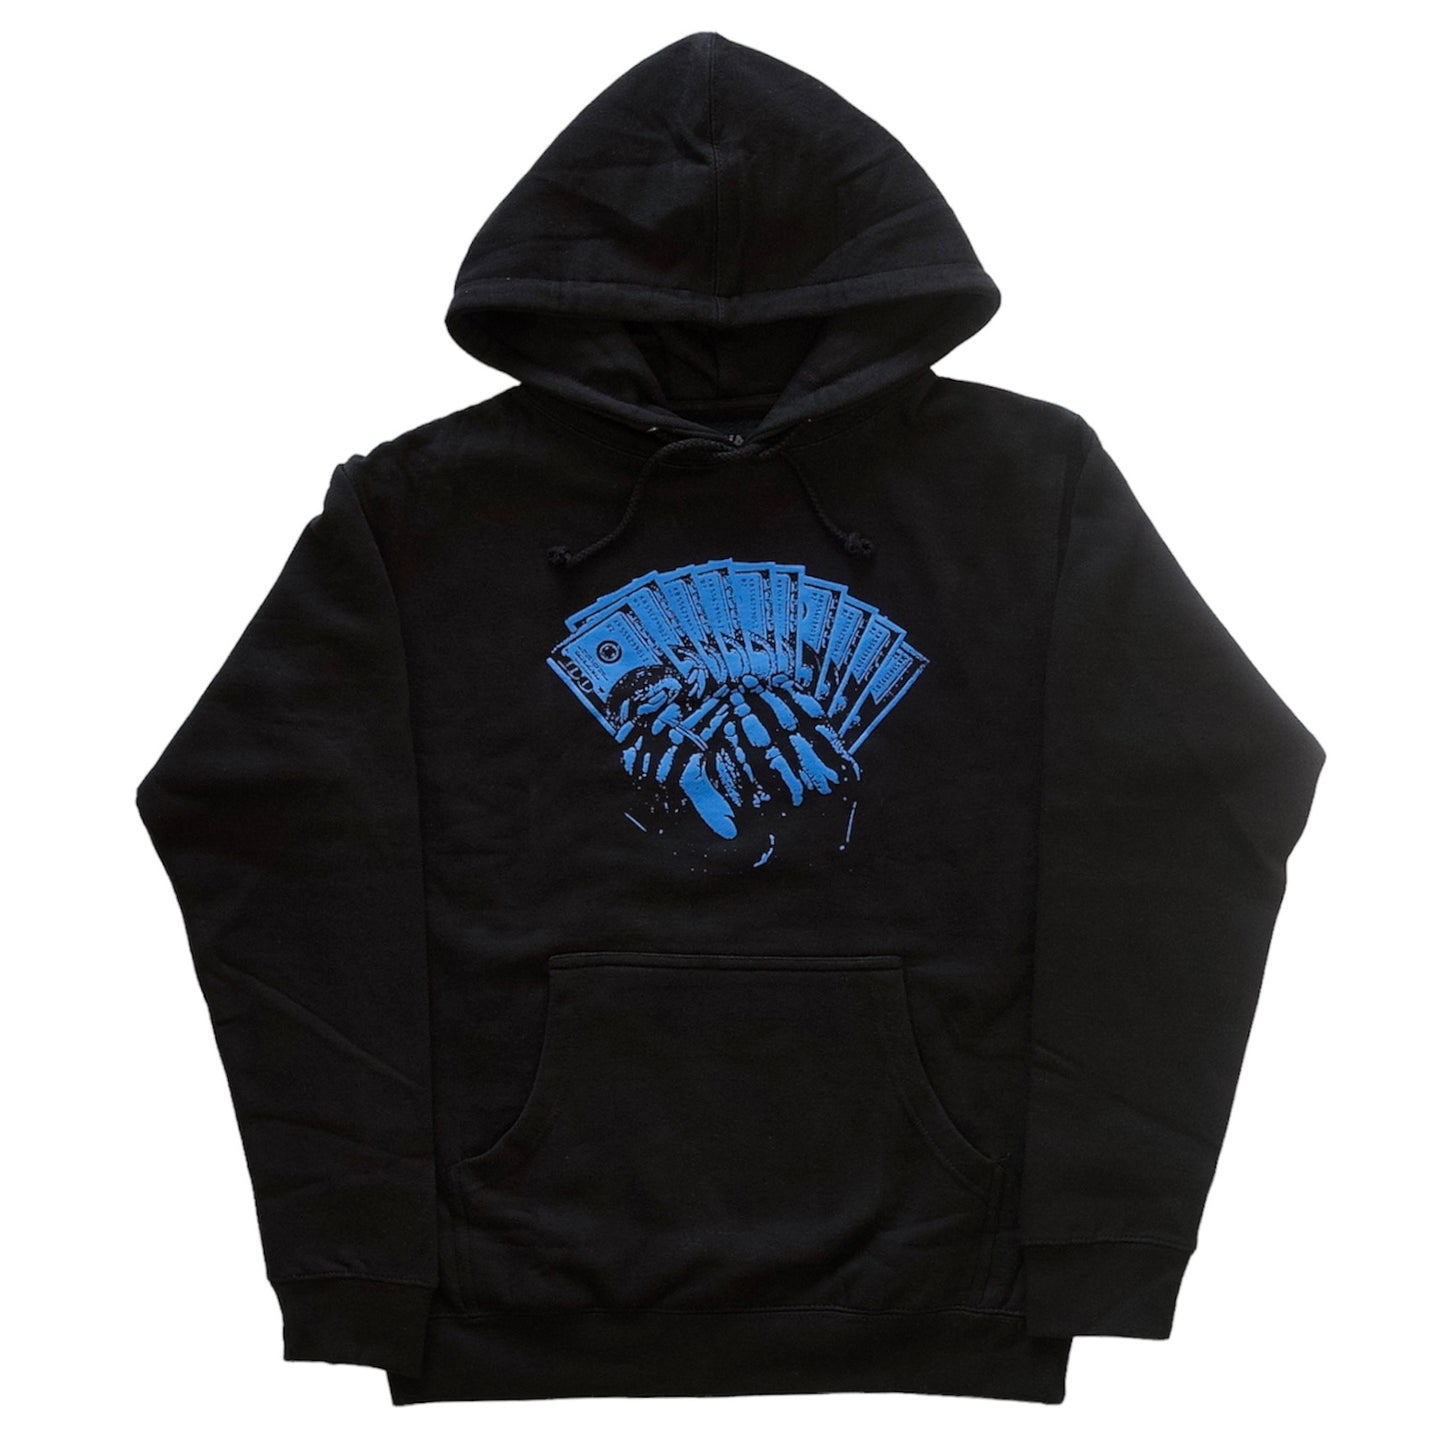 Black “I Need More Bands And Less Friends” Hoodie